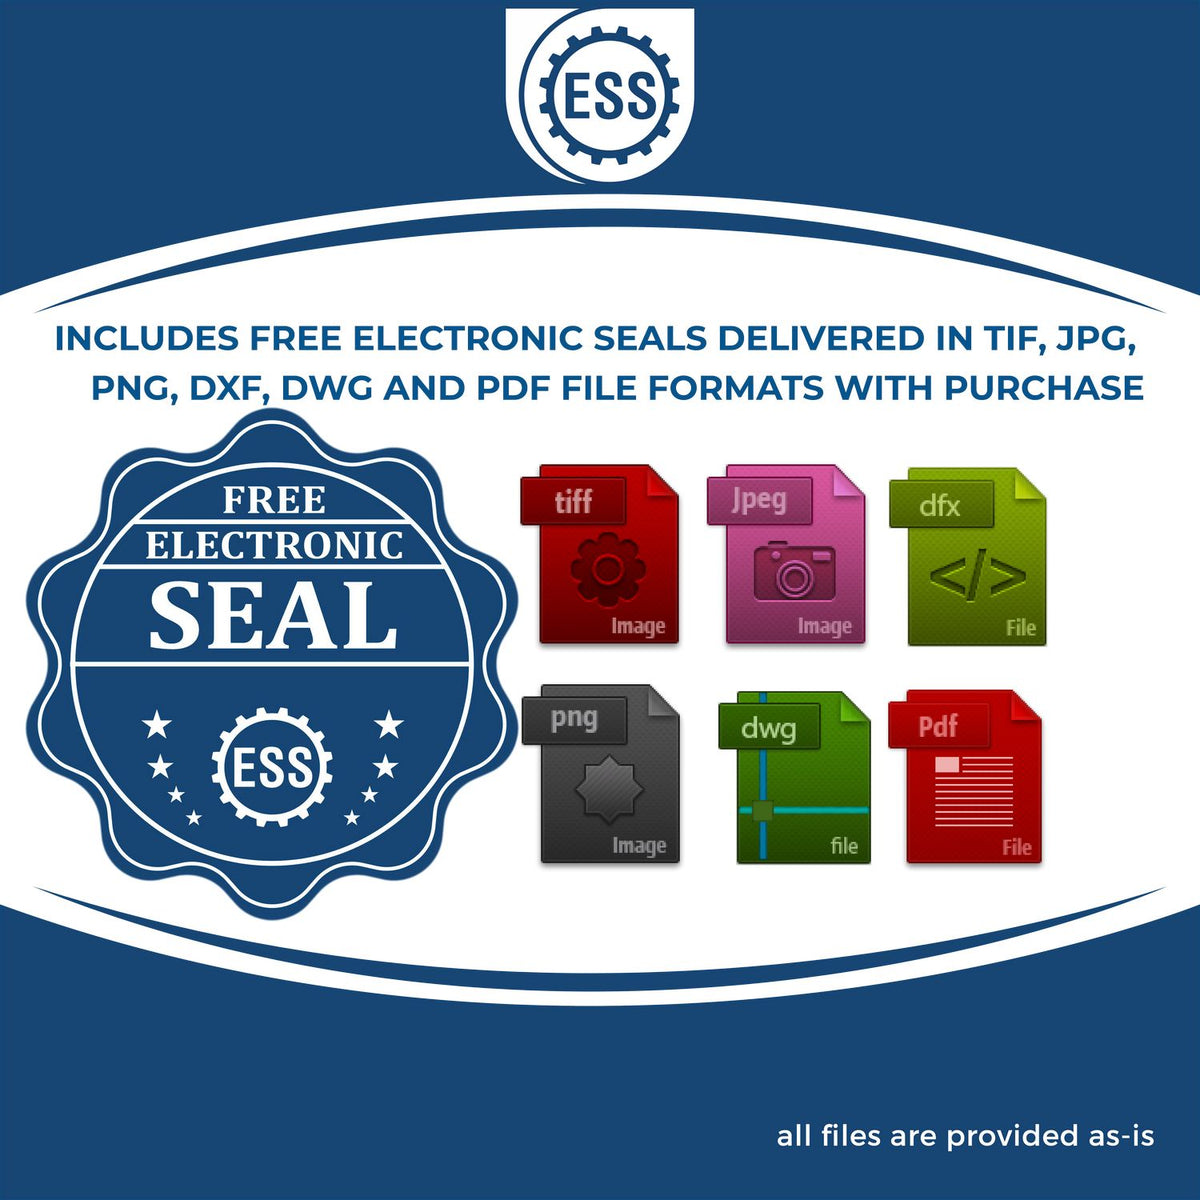 An infographic for the free electronic seal for the Louisiana Professional Geologist Seal Stamp illustrating the different file type icons such as DXF, DWG, TIF, JPG and PNG.